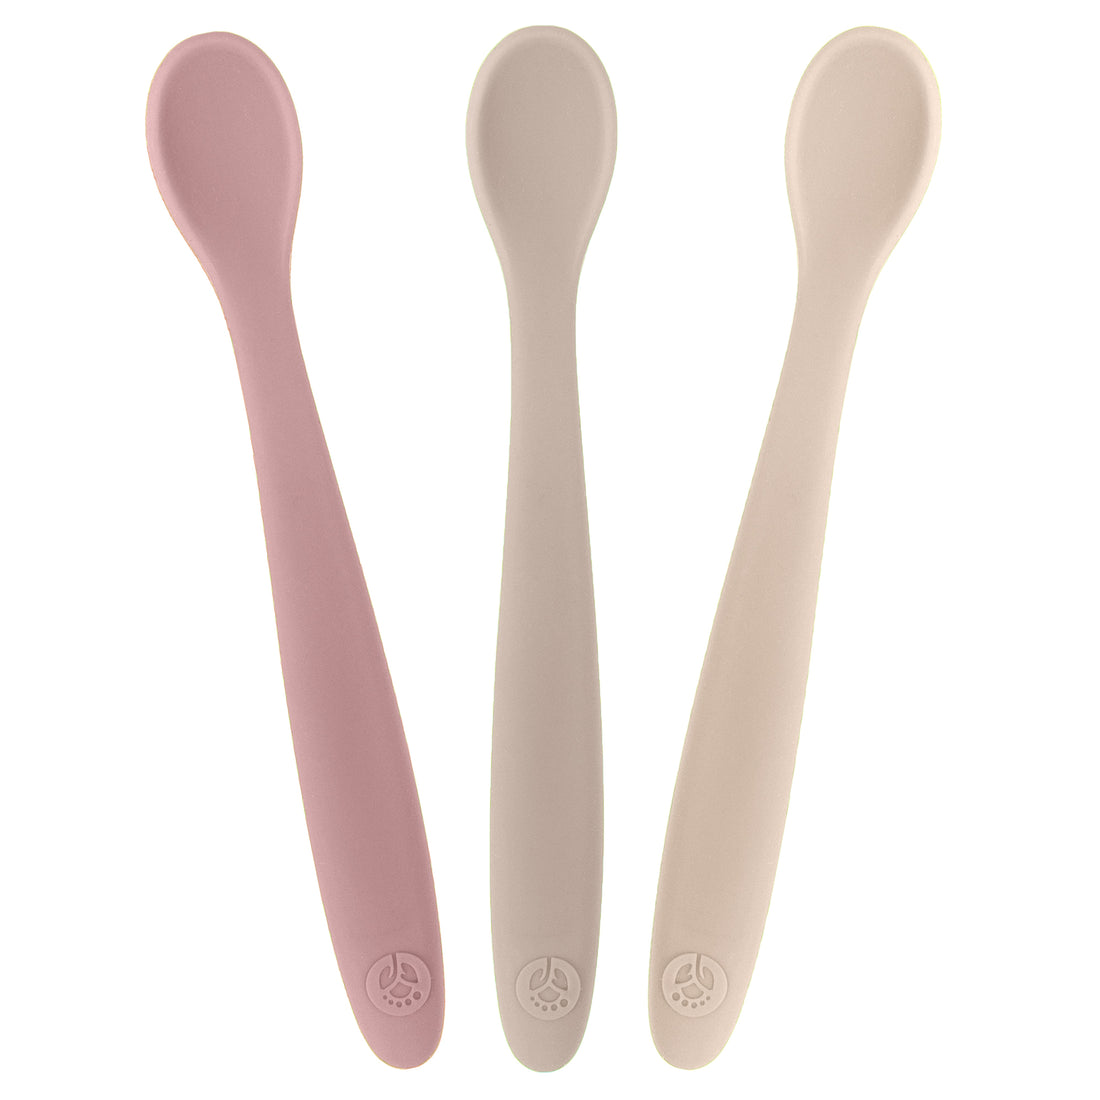 1st stage 2 silicone spoon set + carry box grey/pink